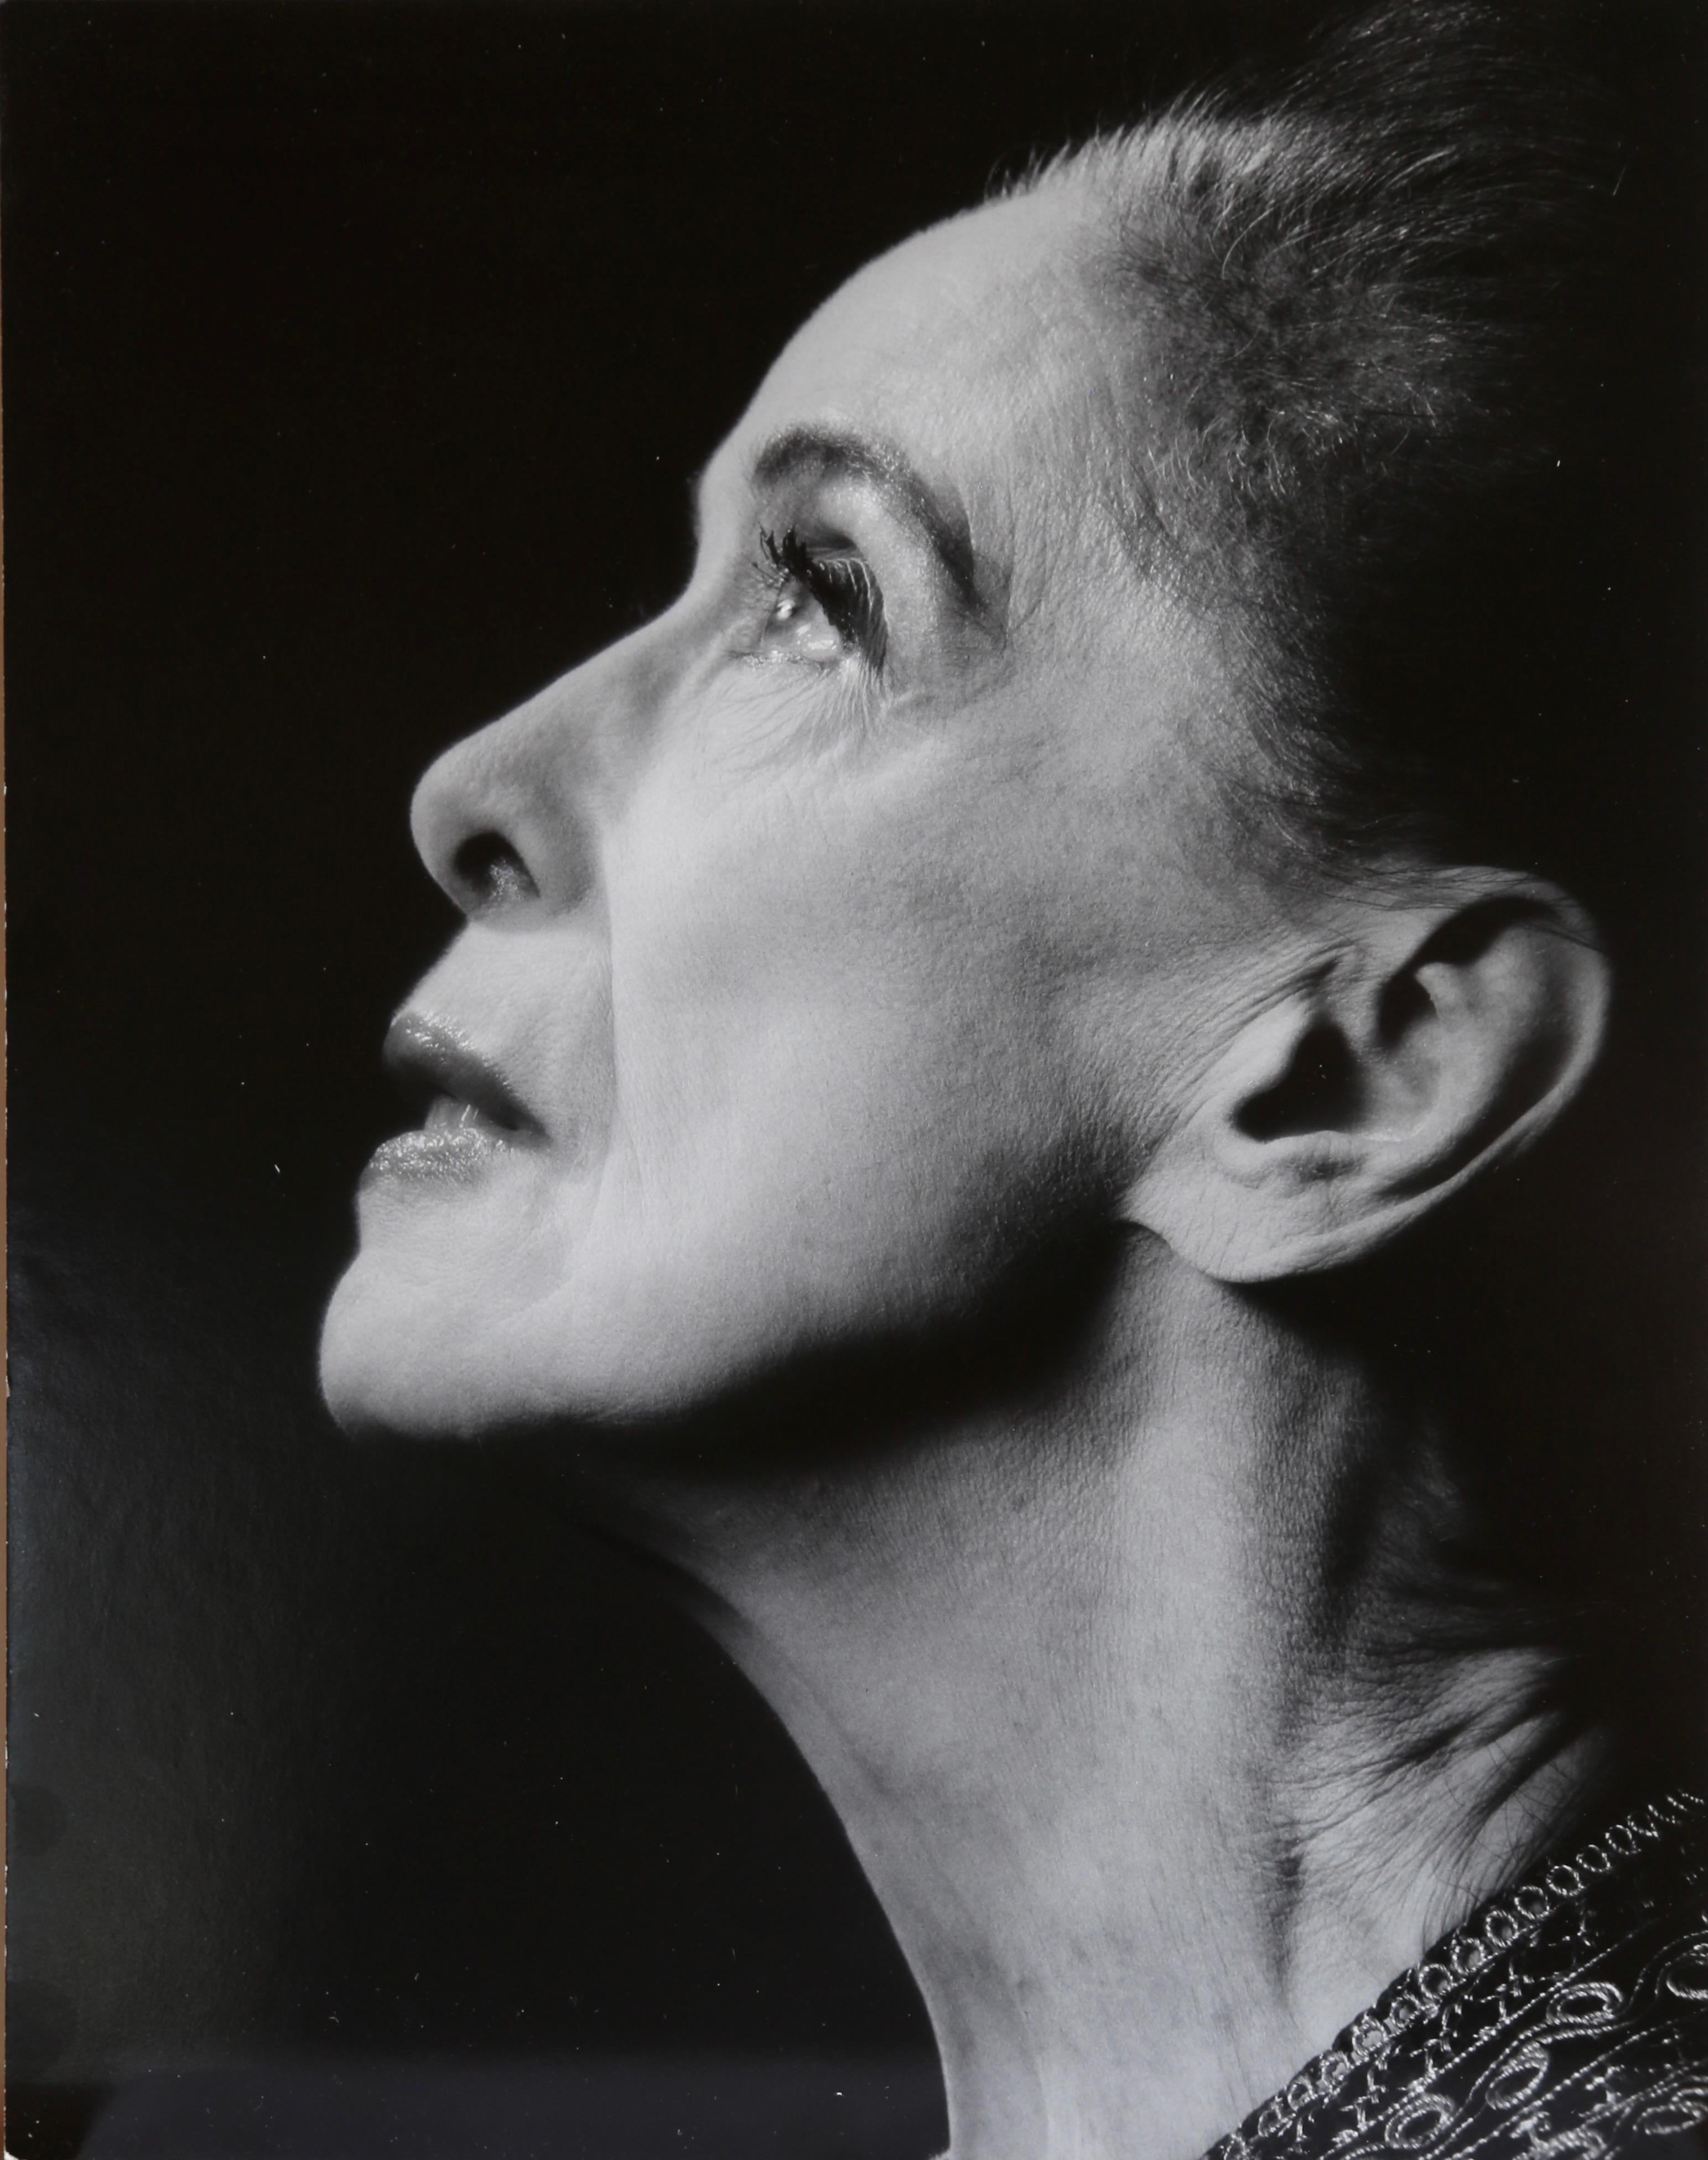 Jack Mitchell signed vintage mid-20th Century portrait of modern dance legend Martha Graham. Photo taken in 1973. Highly collectible original vintage silver gelatin print of one of the greatest figures in 20th Century Dance and Art. Stamped on the